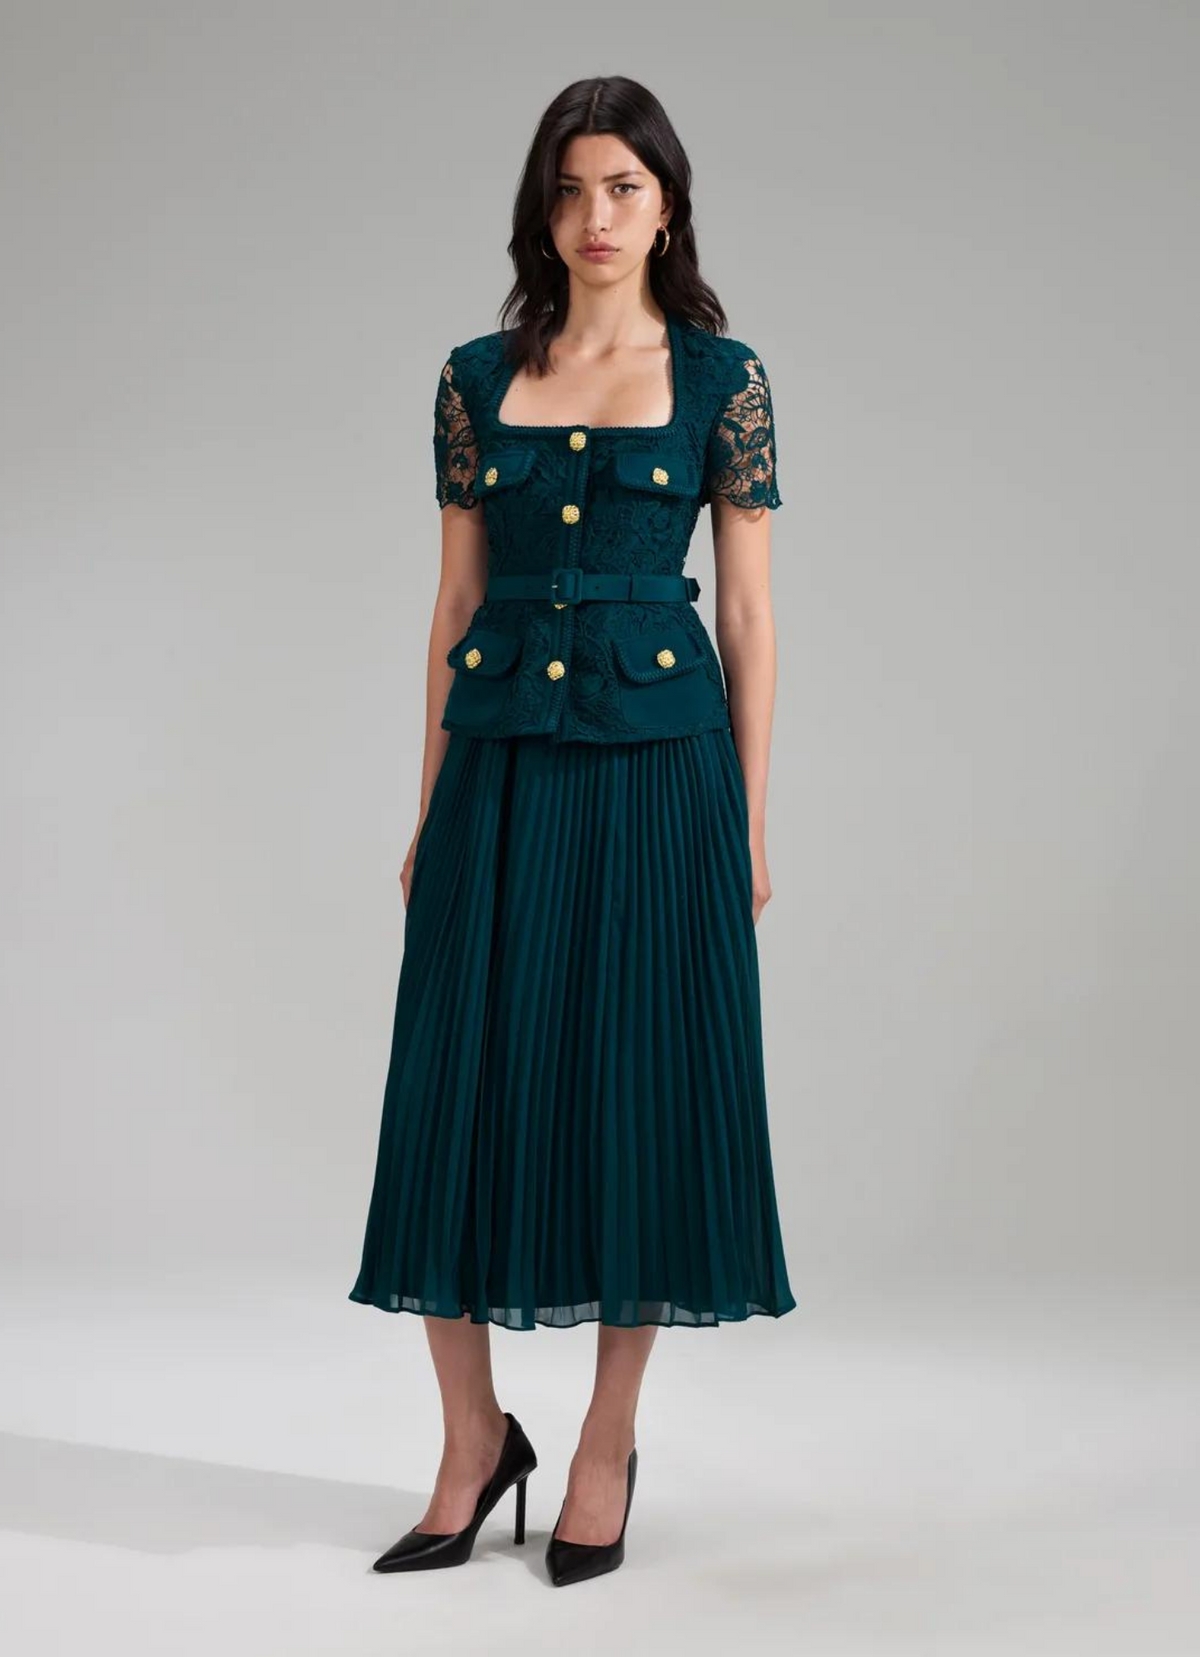 Teal dress with short lace sleeves gold hardware and pleated chiffon midi skirt and detachable belt